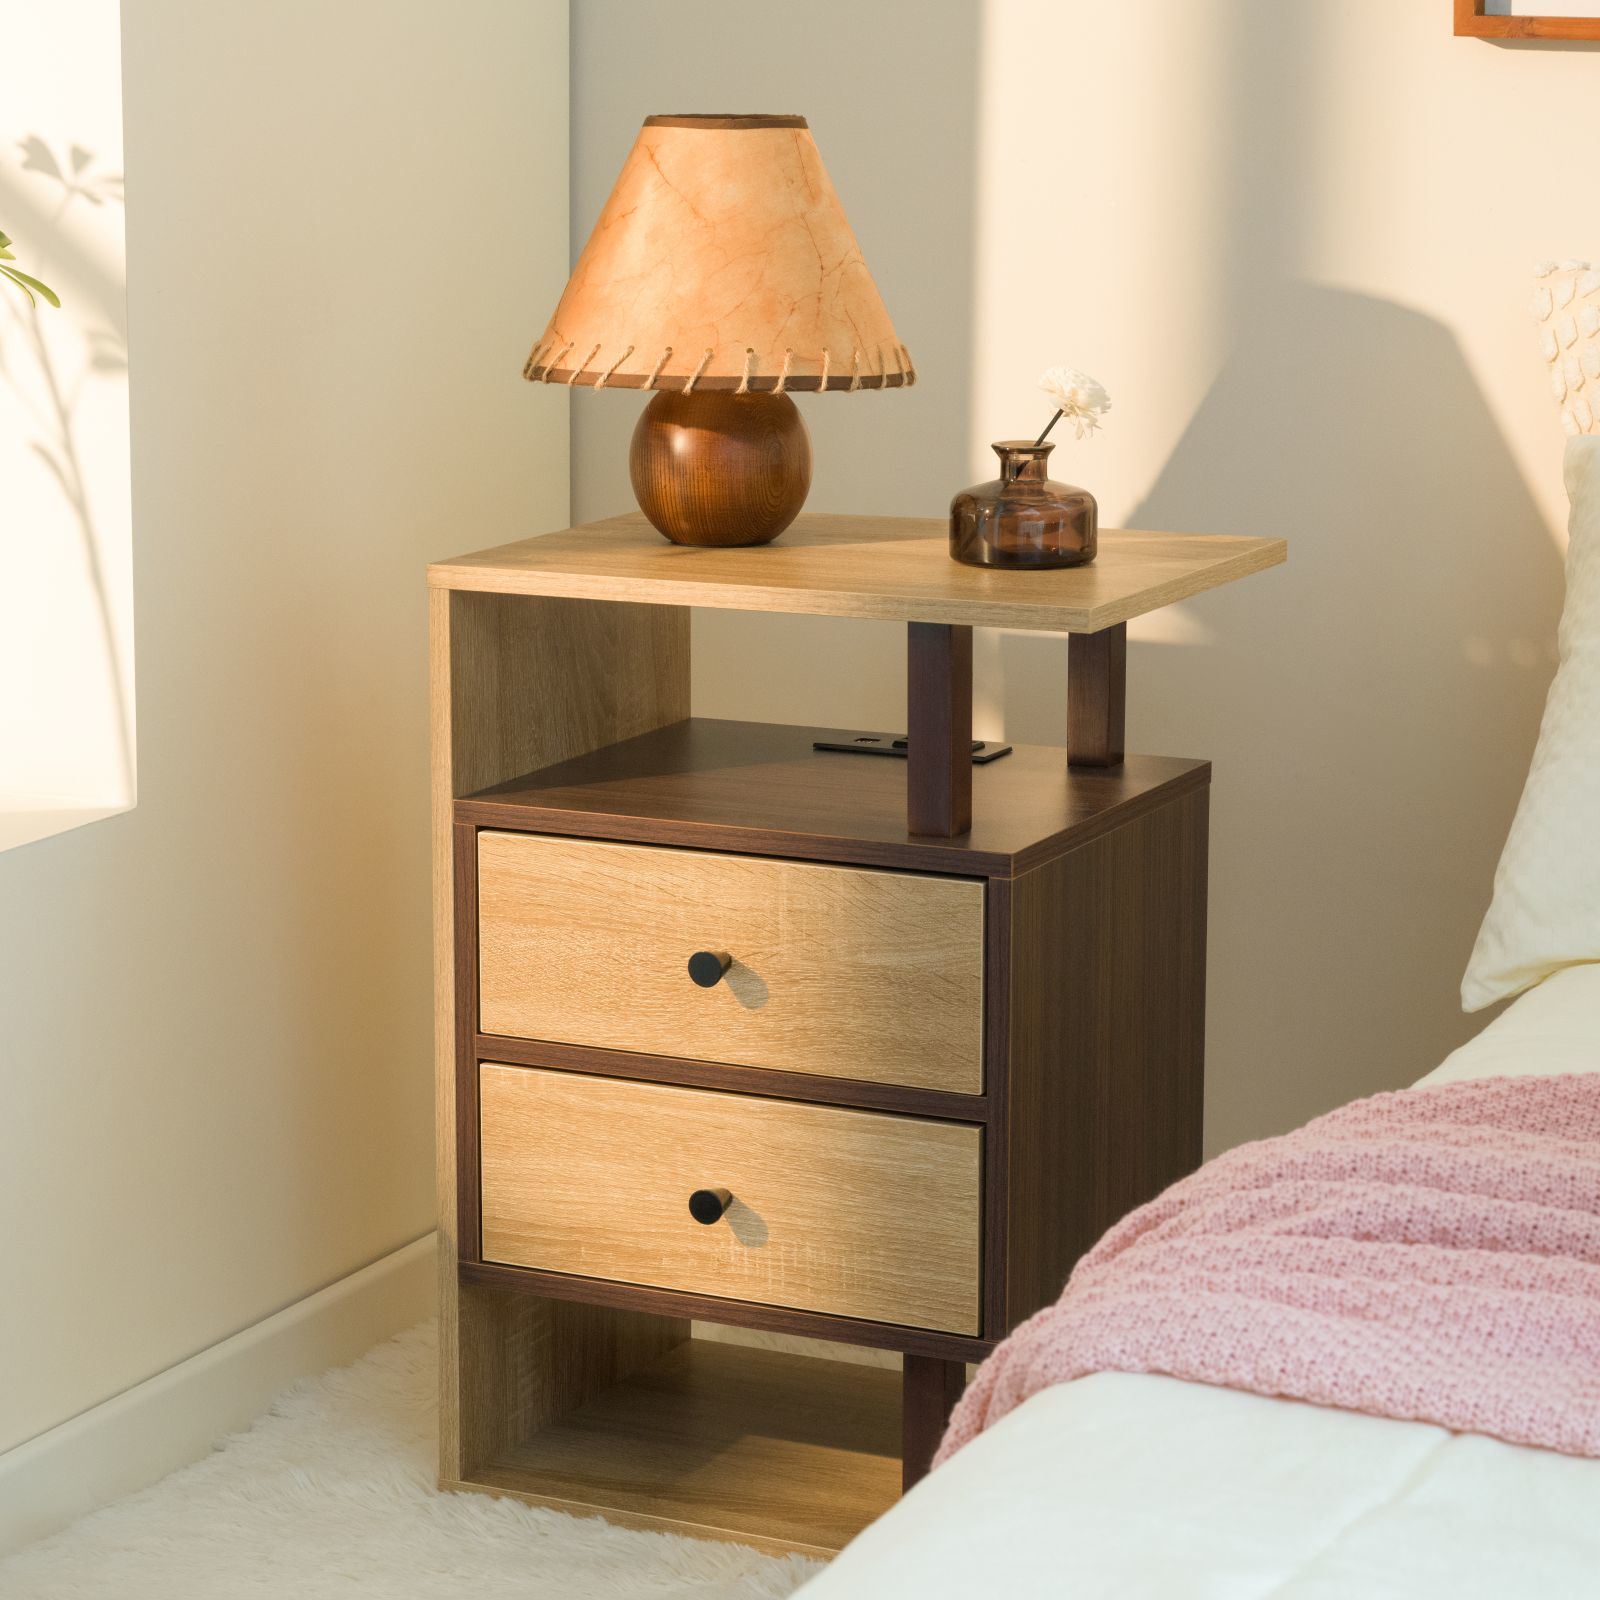 Nightstand with Charging Station - Bed Side Table with 2 Drawers, USB Ports & Outlets